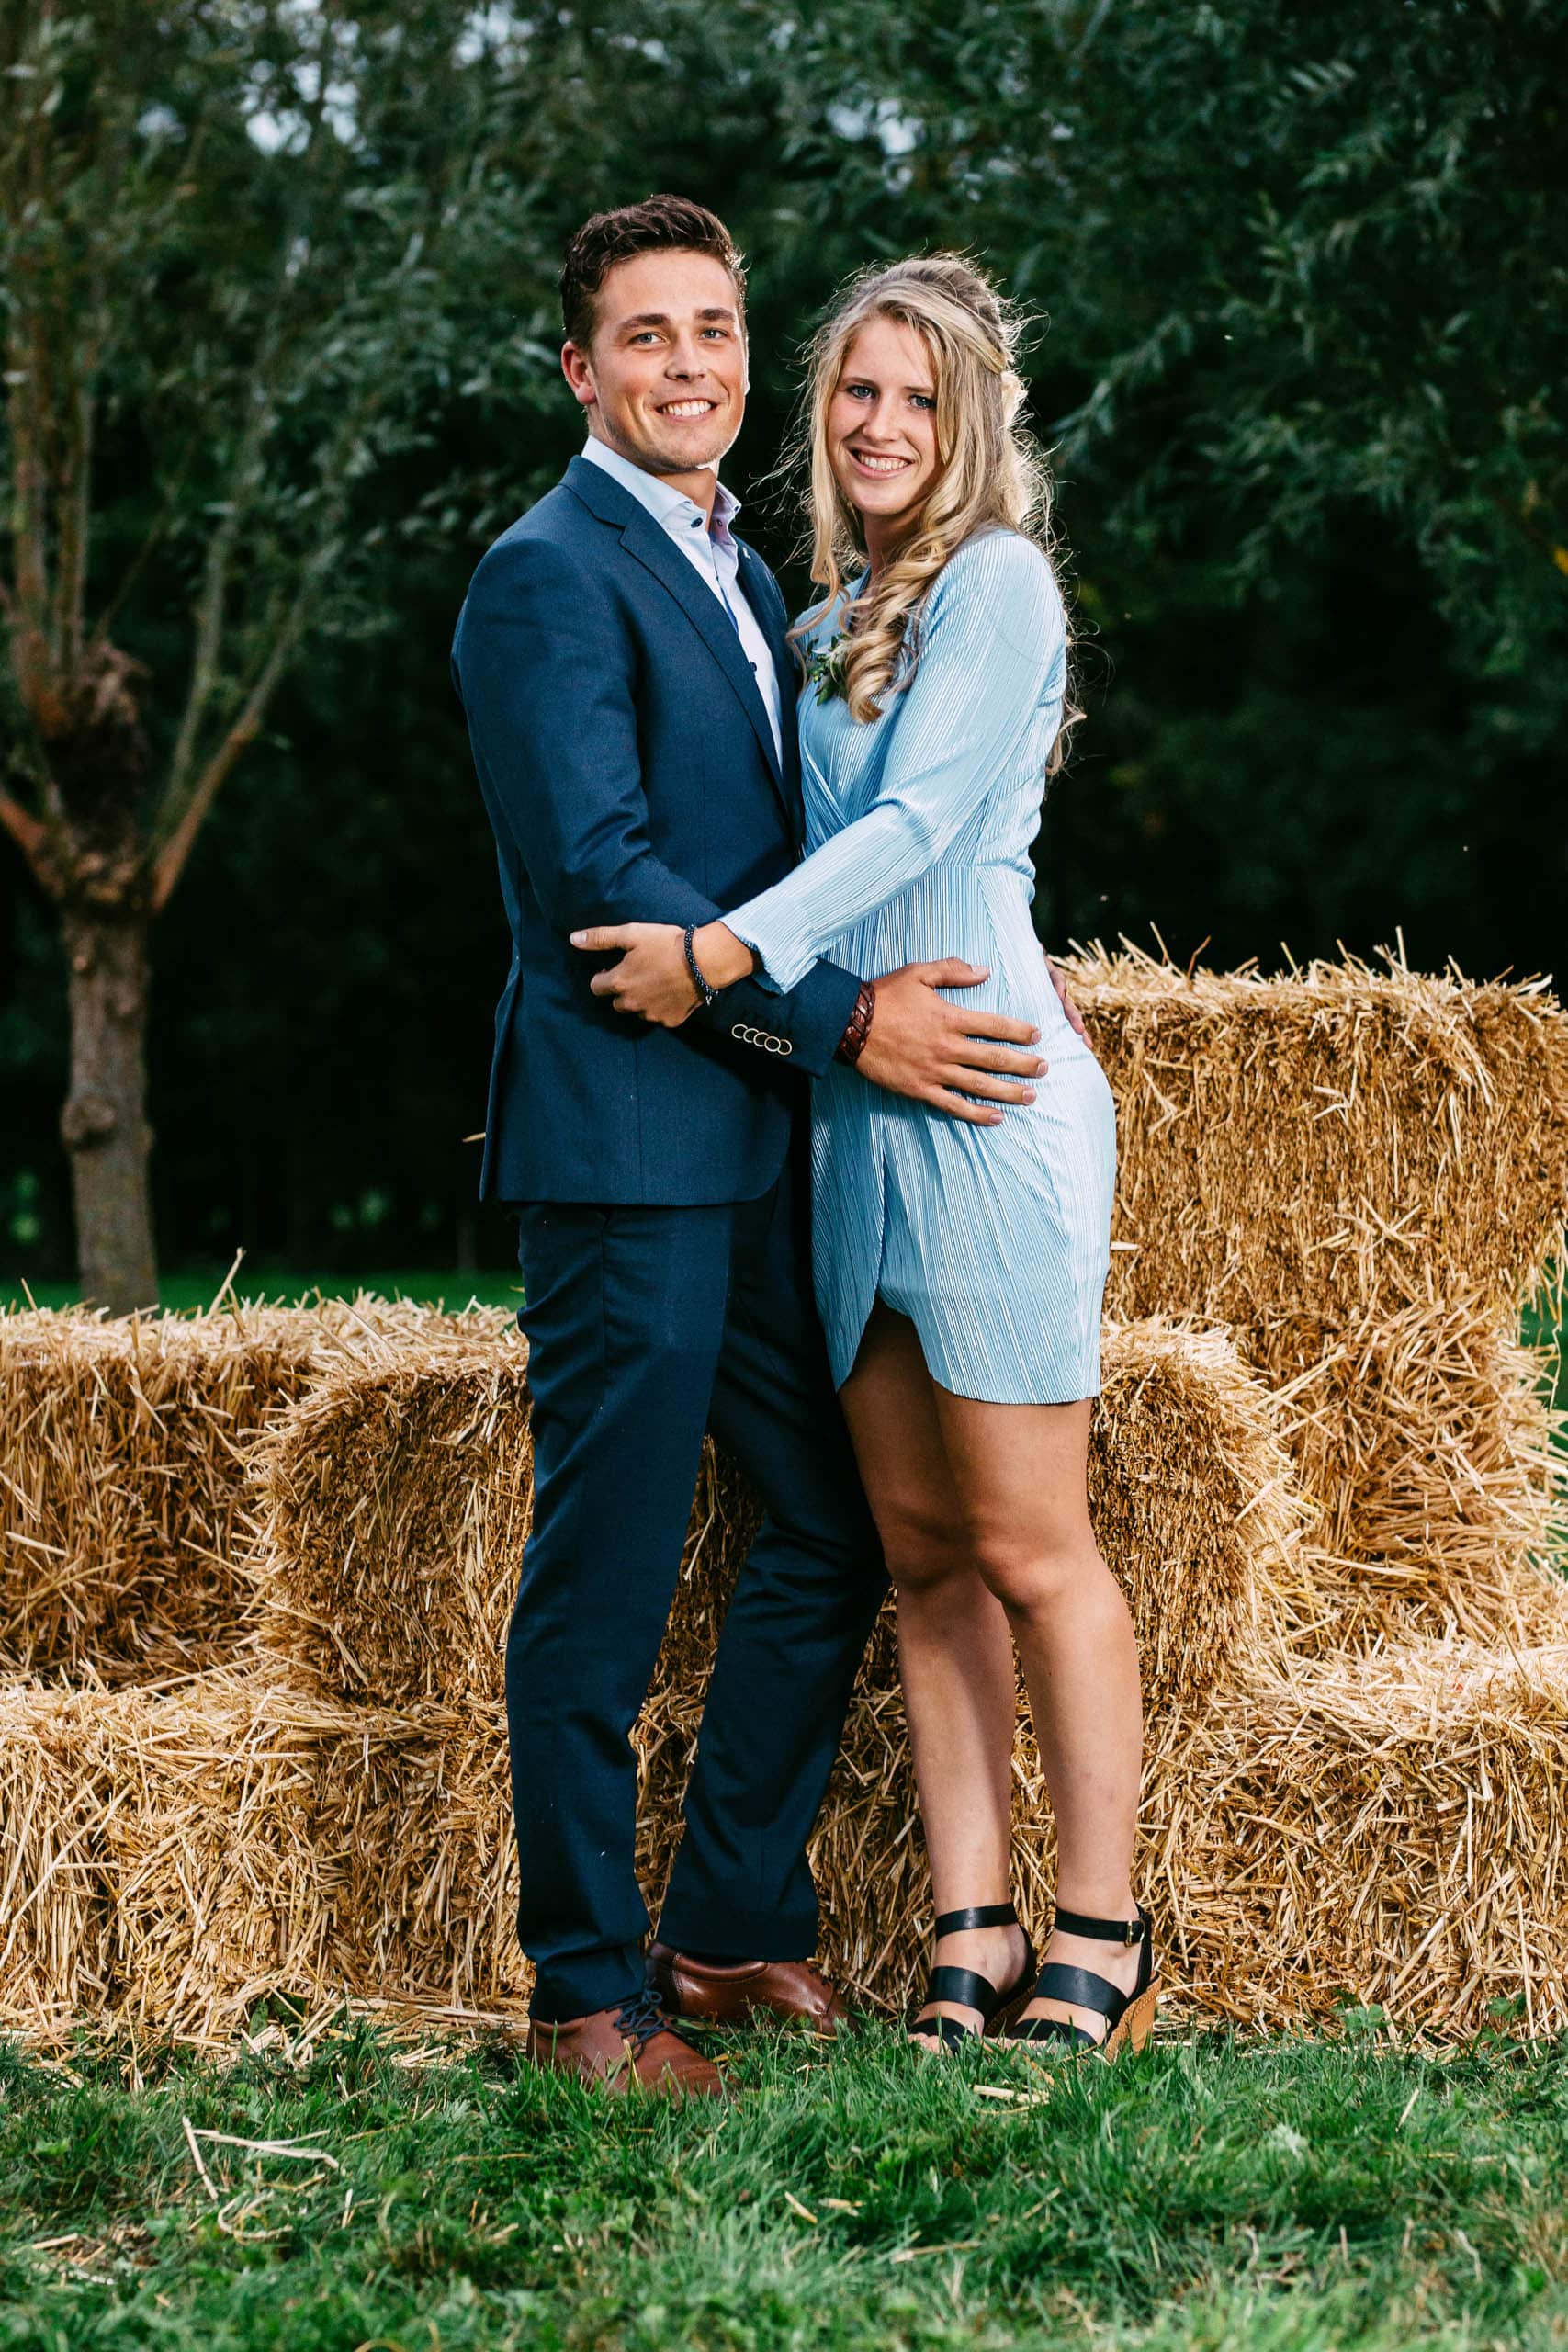 A couple posing elegantly in front of hay bales, showing off their impeccable 'tenue de ville' style.